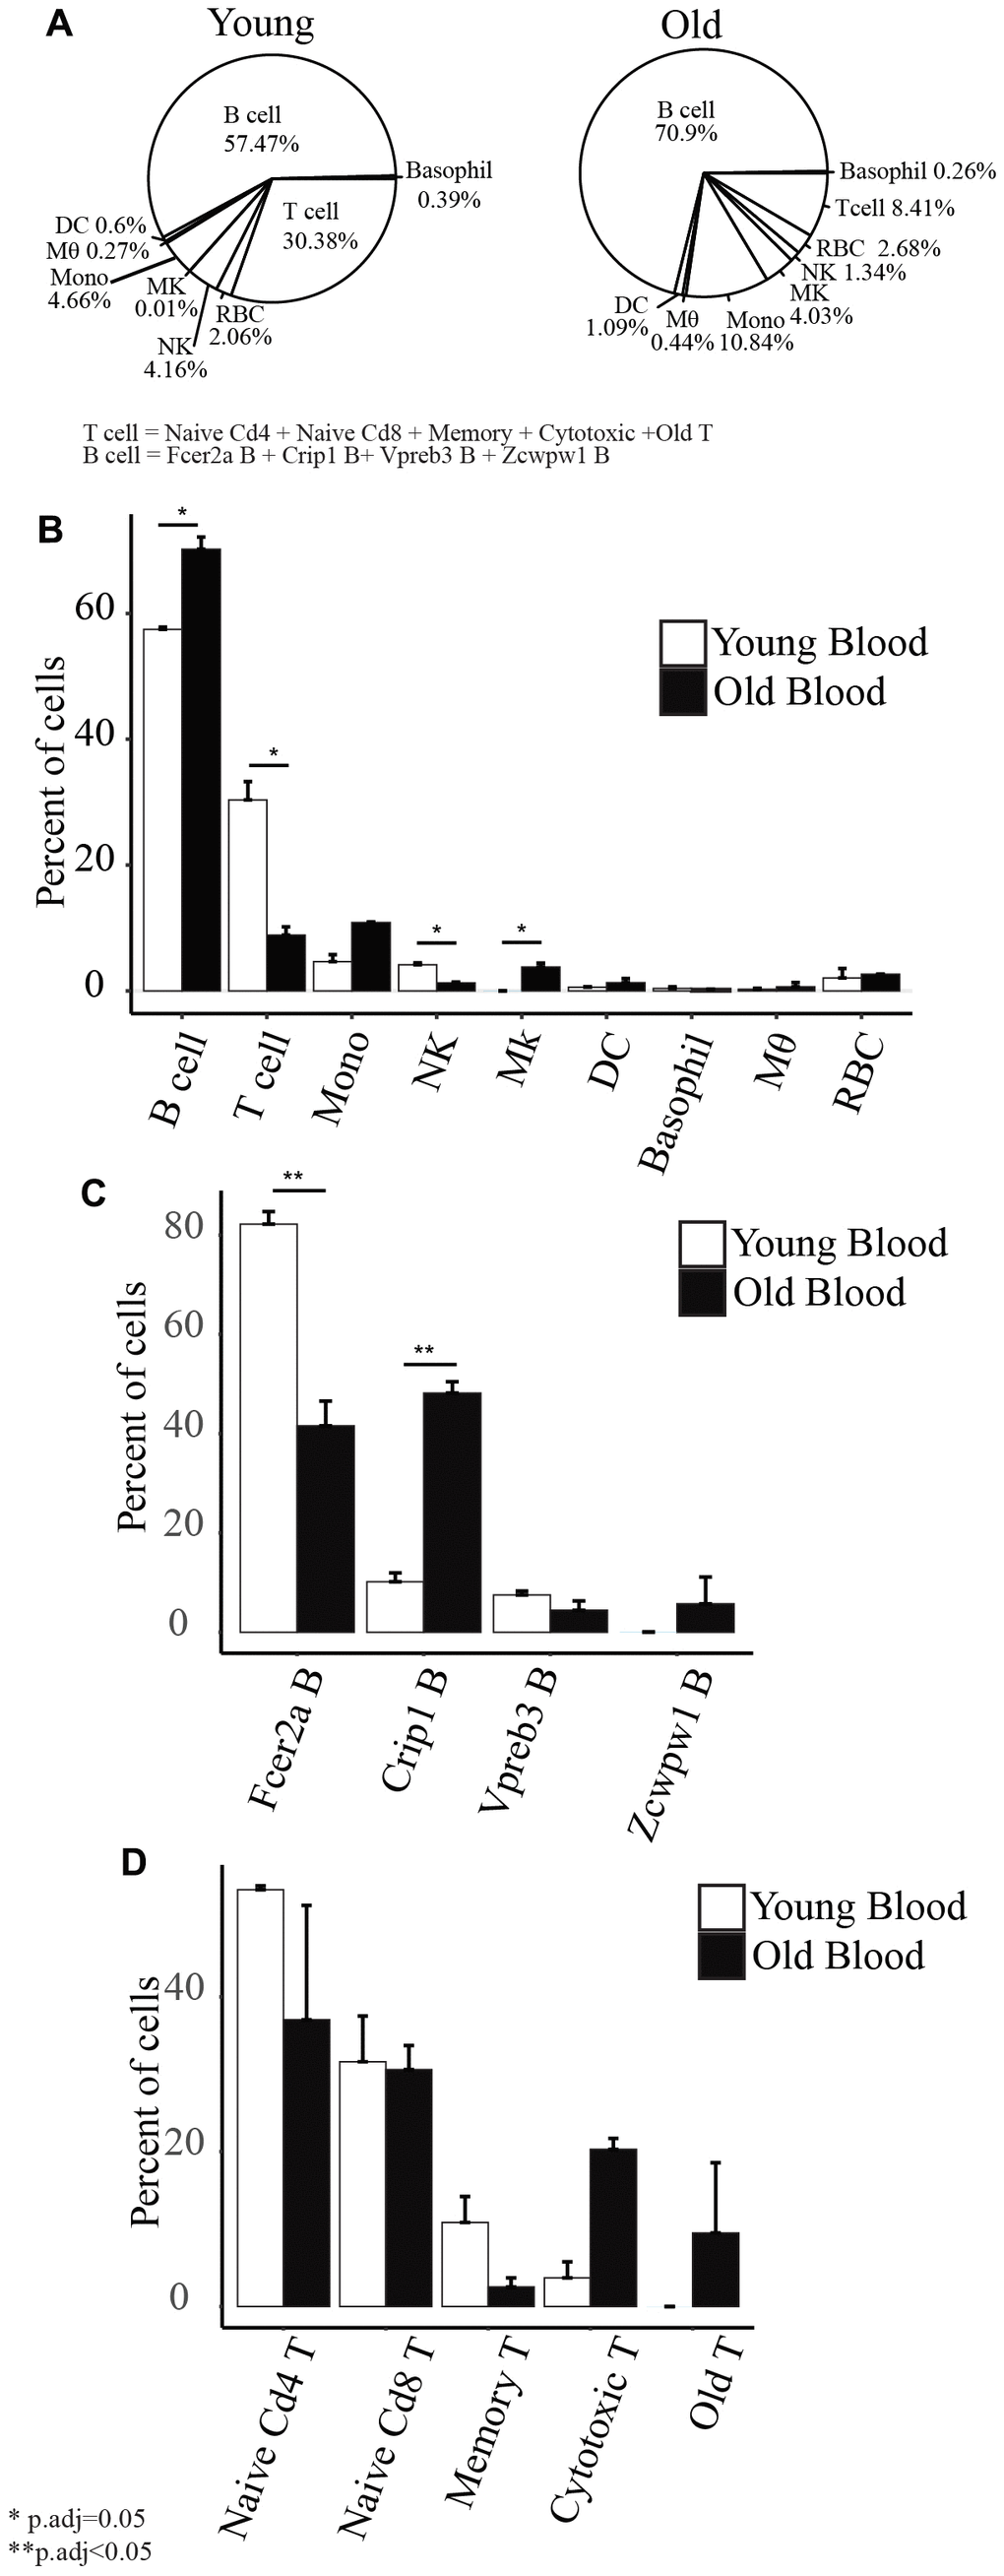 (A) Cell type composition of old and young peripheral blood. (B) Barplots showing the comparison of the percentage of each cell type with age. (C) Barplots showing the comparison of the subset of B cells’ percentage with age. (D) Barplots showing the comparison of the subsets of T cells’ percentage with age.